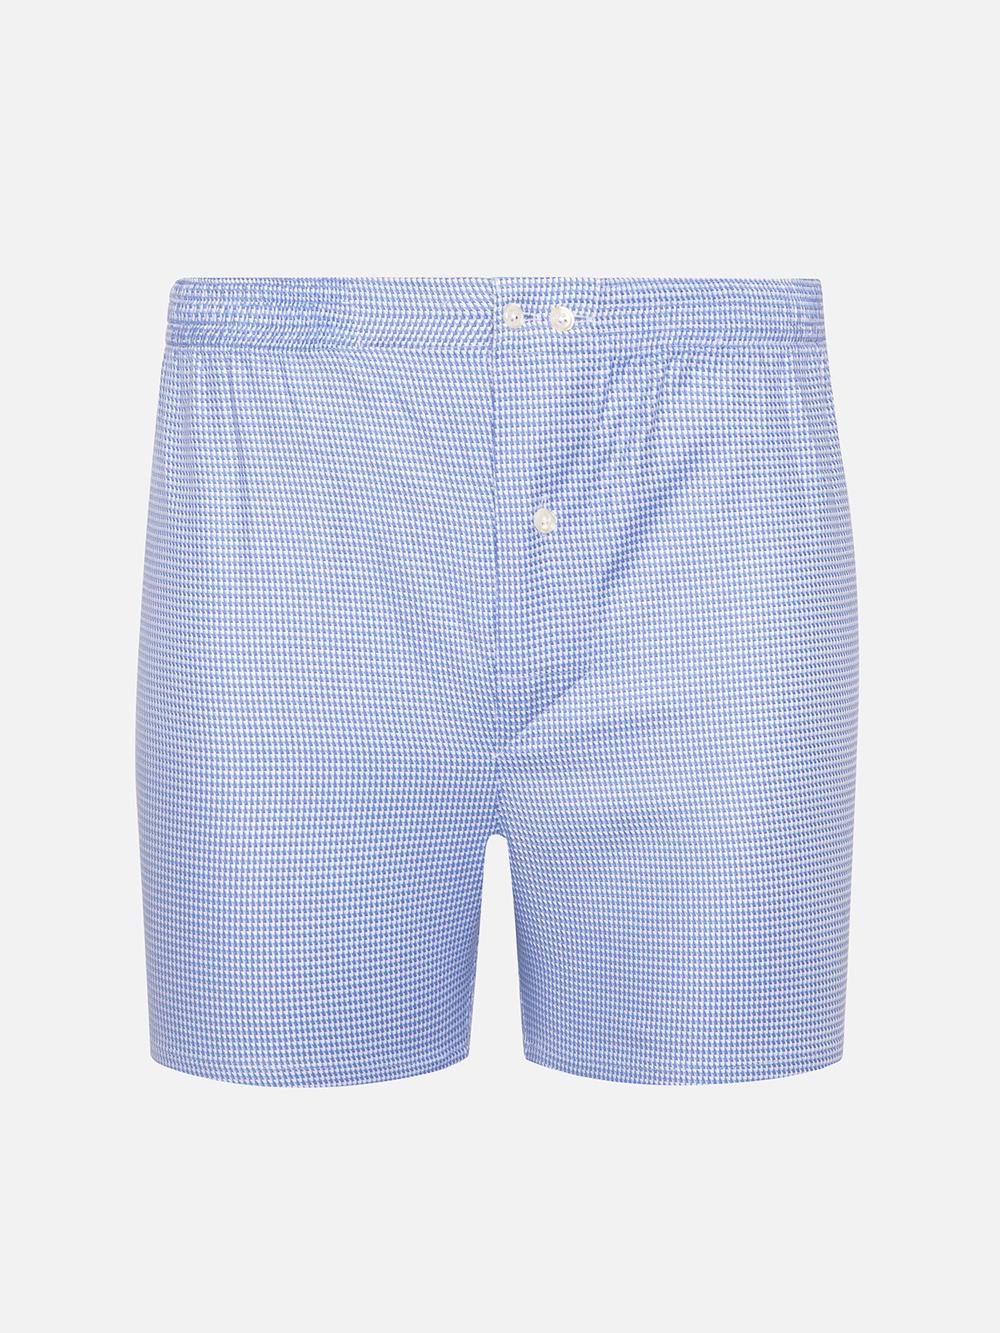 Stanley red striped shorts